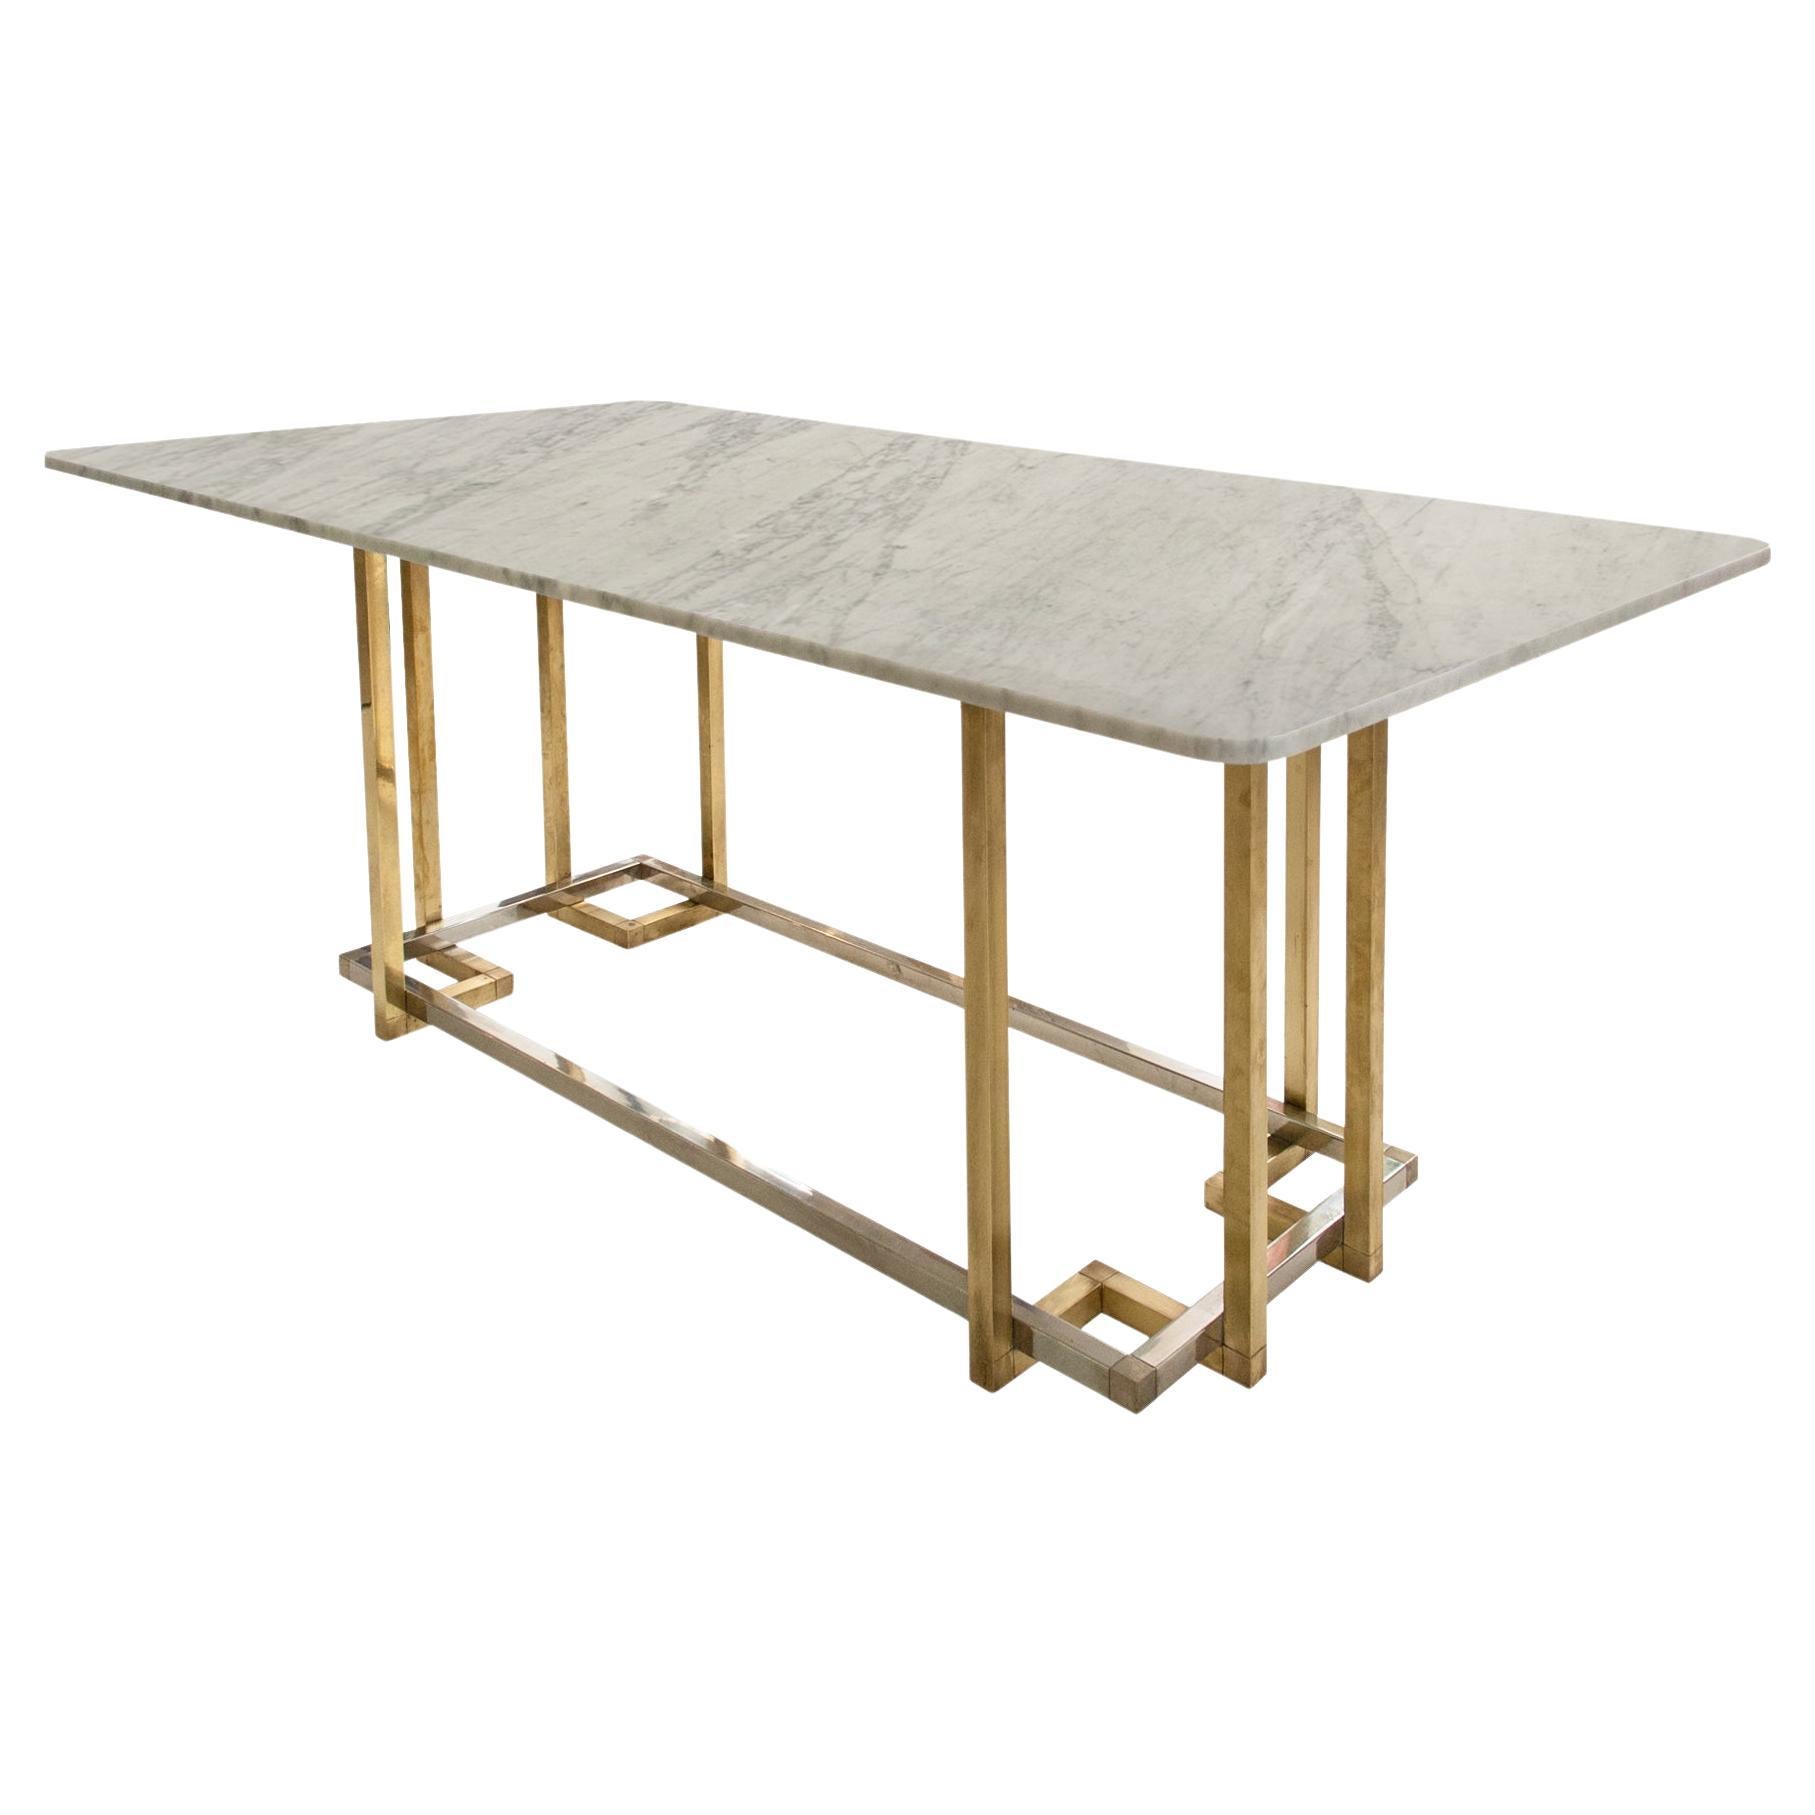 Willy Rizzo's Marble Brass Chromed and Carrara Dining Table, Italy, 1970